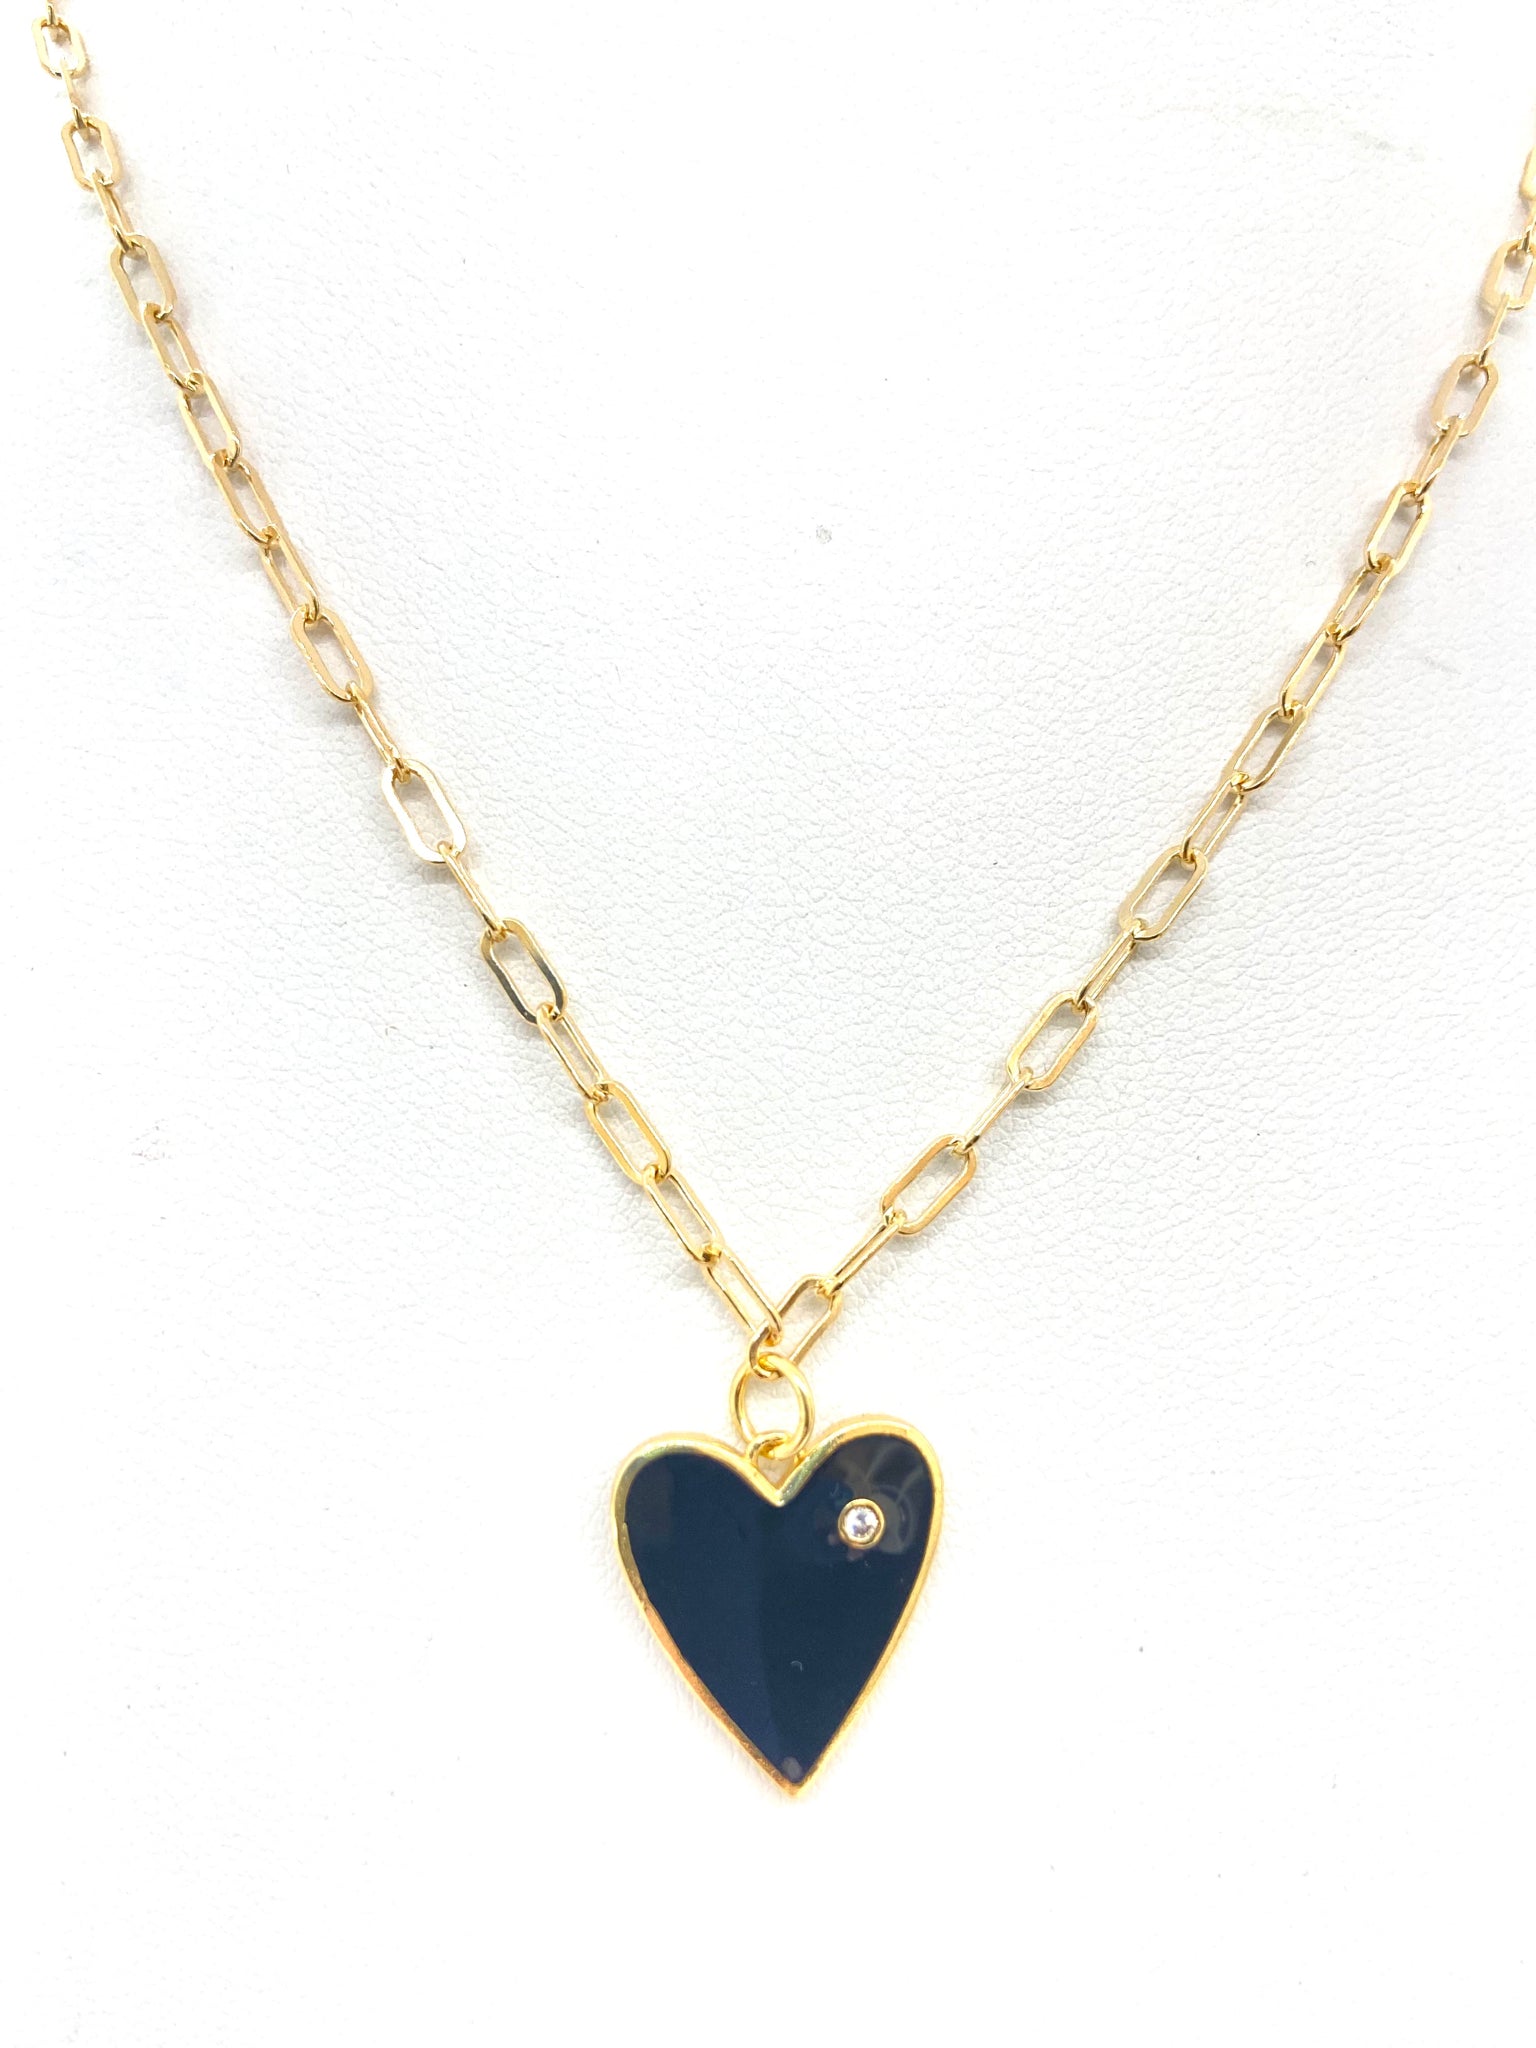 Gold Filled Paperclip Chain with Black Enamel Heart